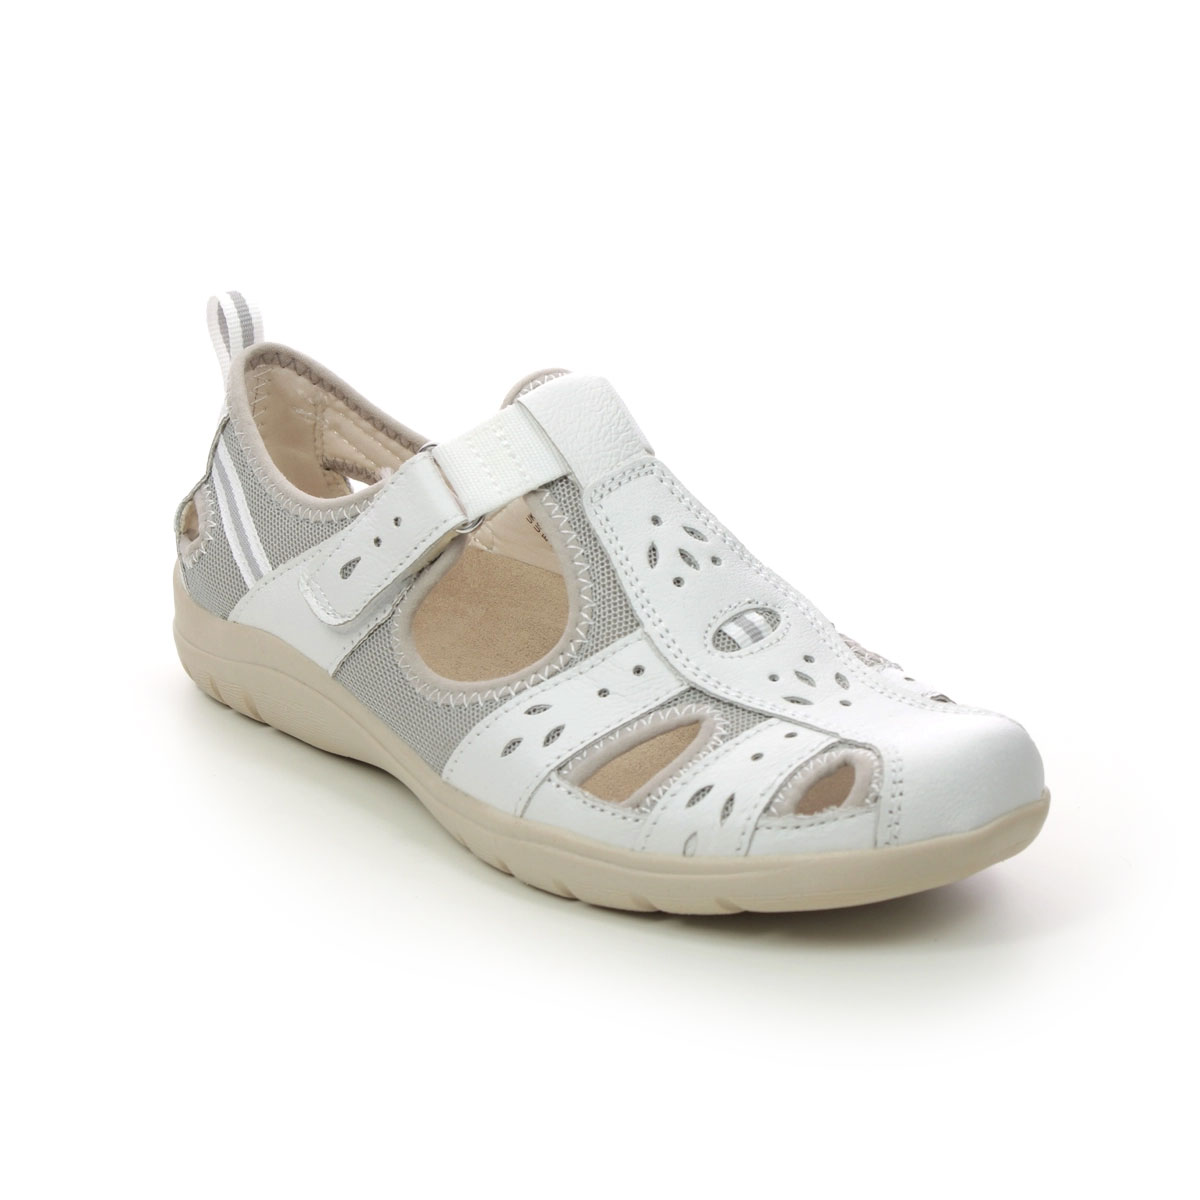 Earth Spirit Cleveland 01 White Leather Womens Closed Toe Sandals 40505-61 in a Plain Leather in Size 4